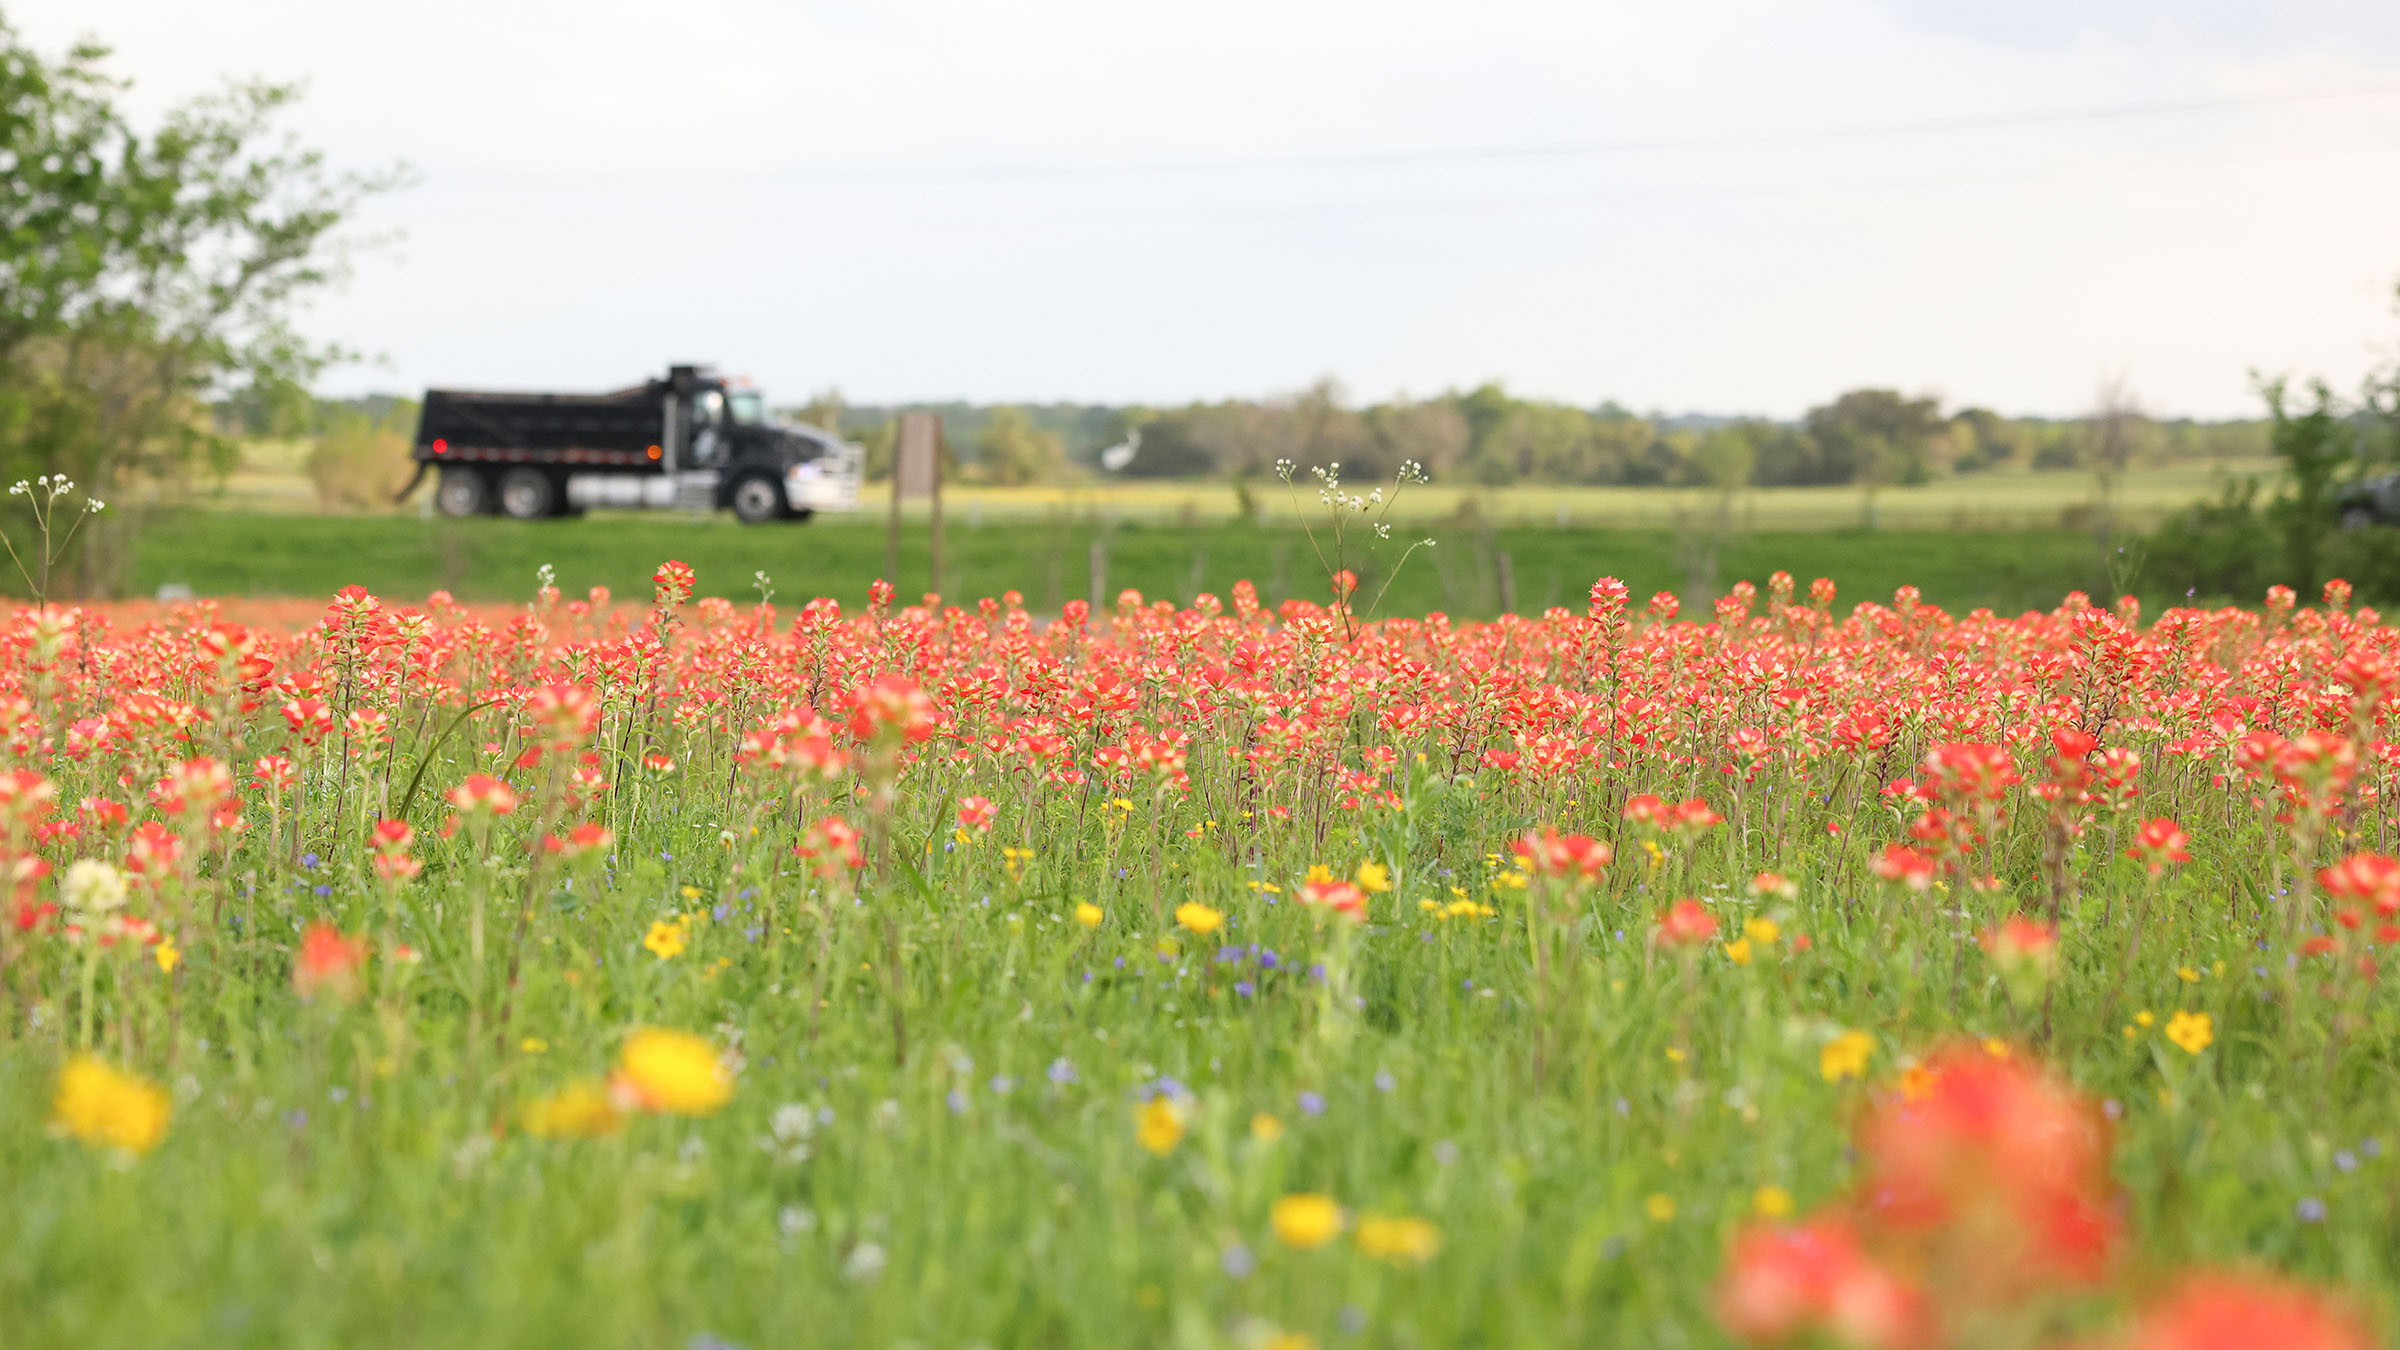 A dump truck drives by a large field of red wildflowers